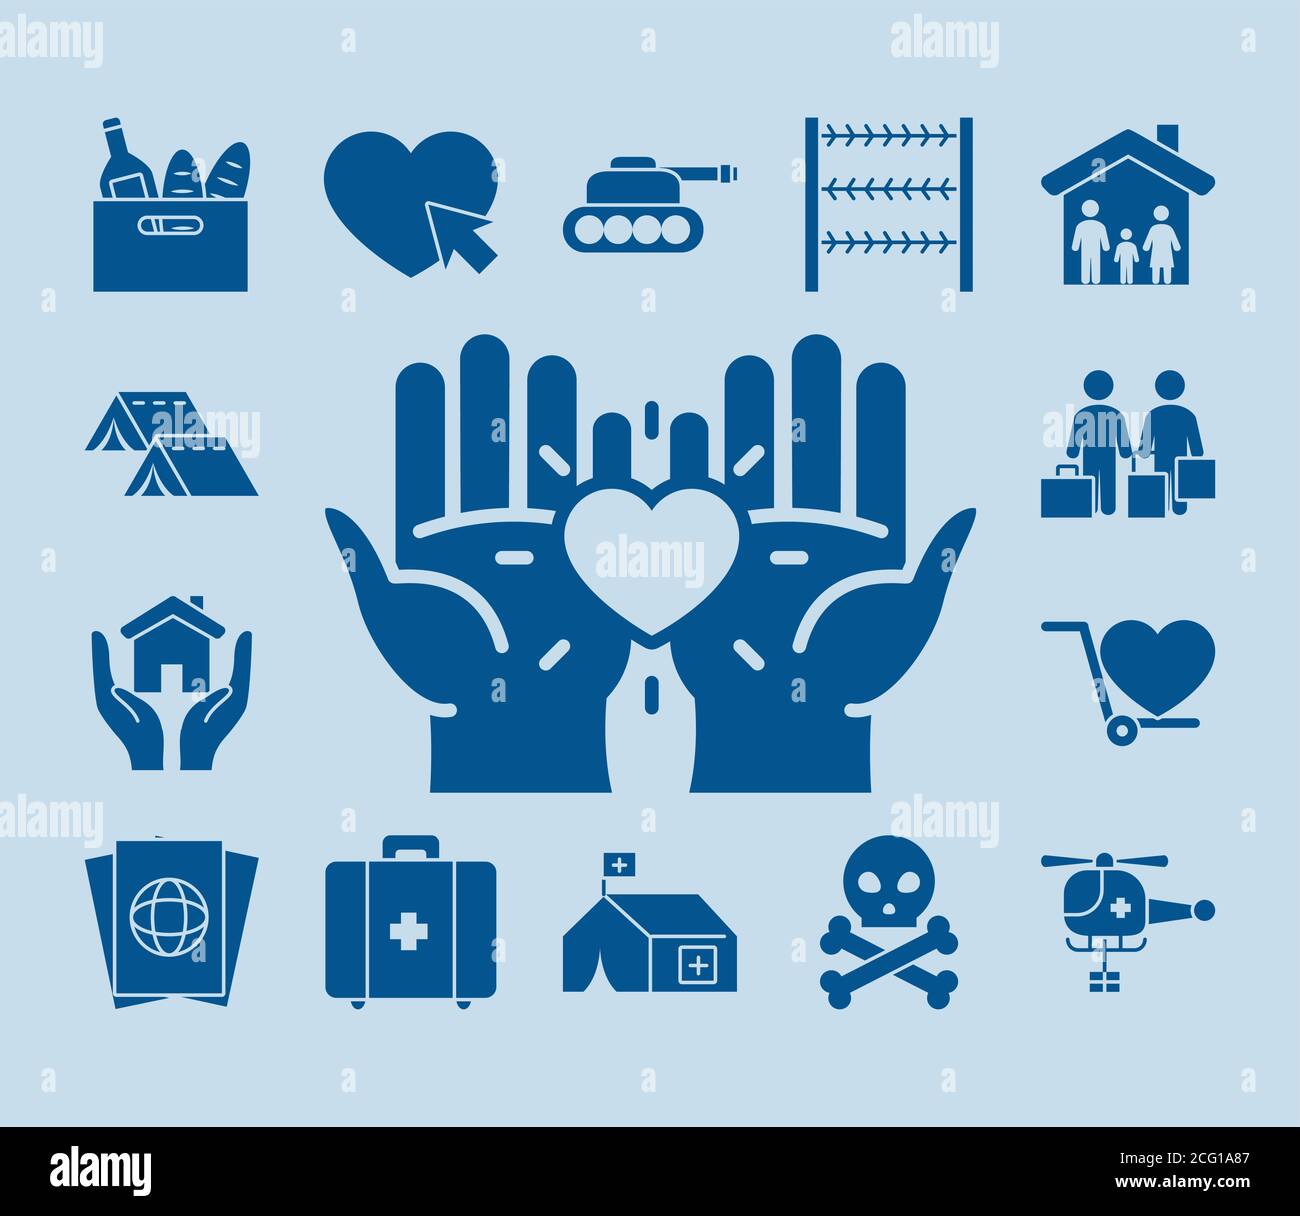 hands and humanitarian help icon set over blue background, silhouette style, vector illustration Stock Vector